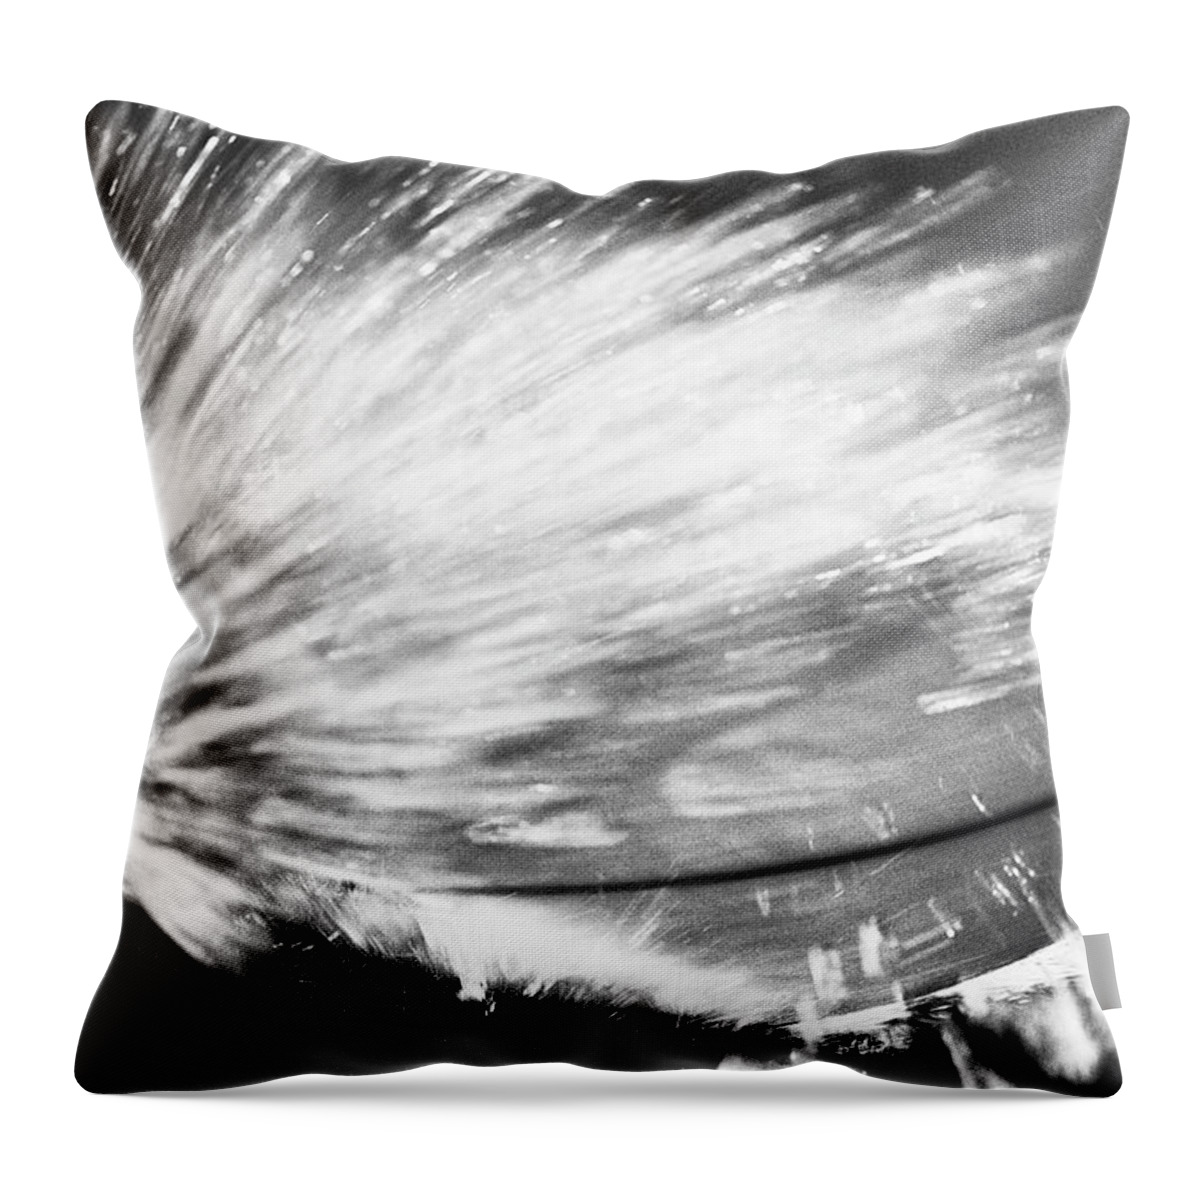 Surfing Throw Pillow featuring the photograph Tom's Board by Nik West